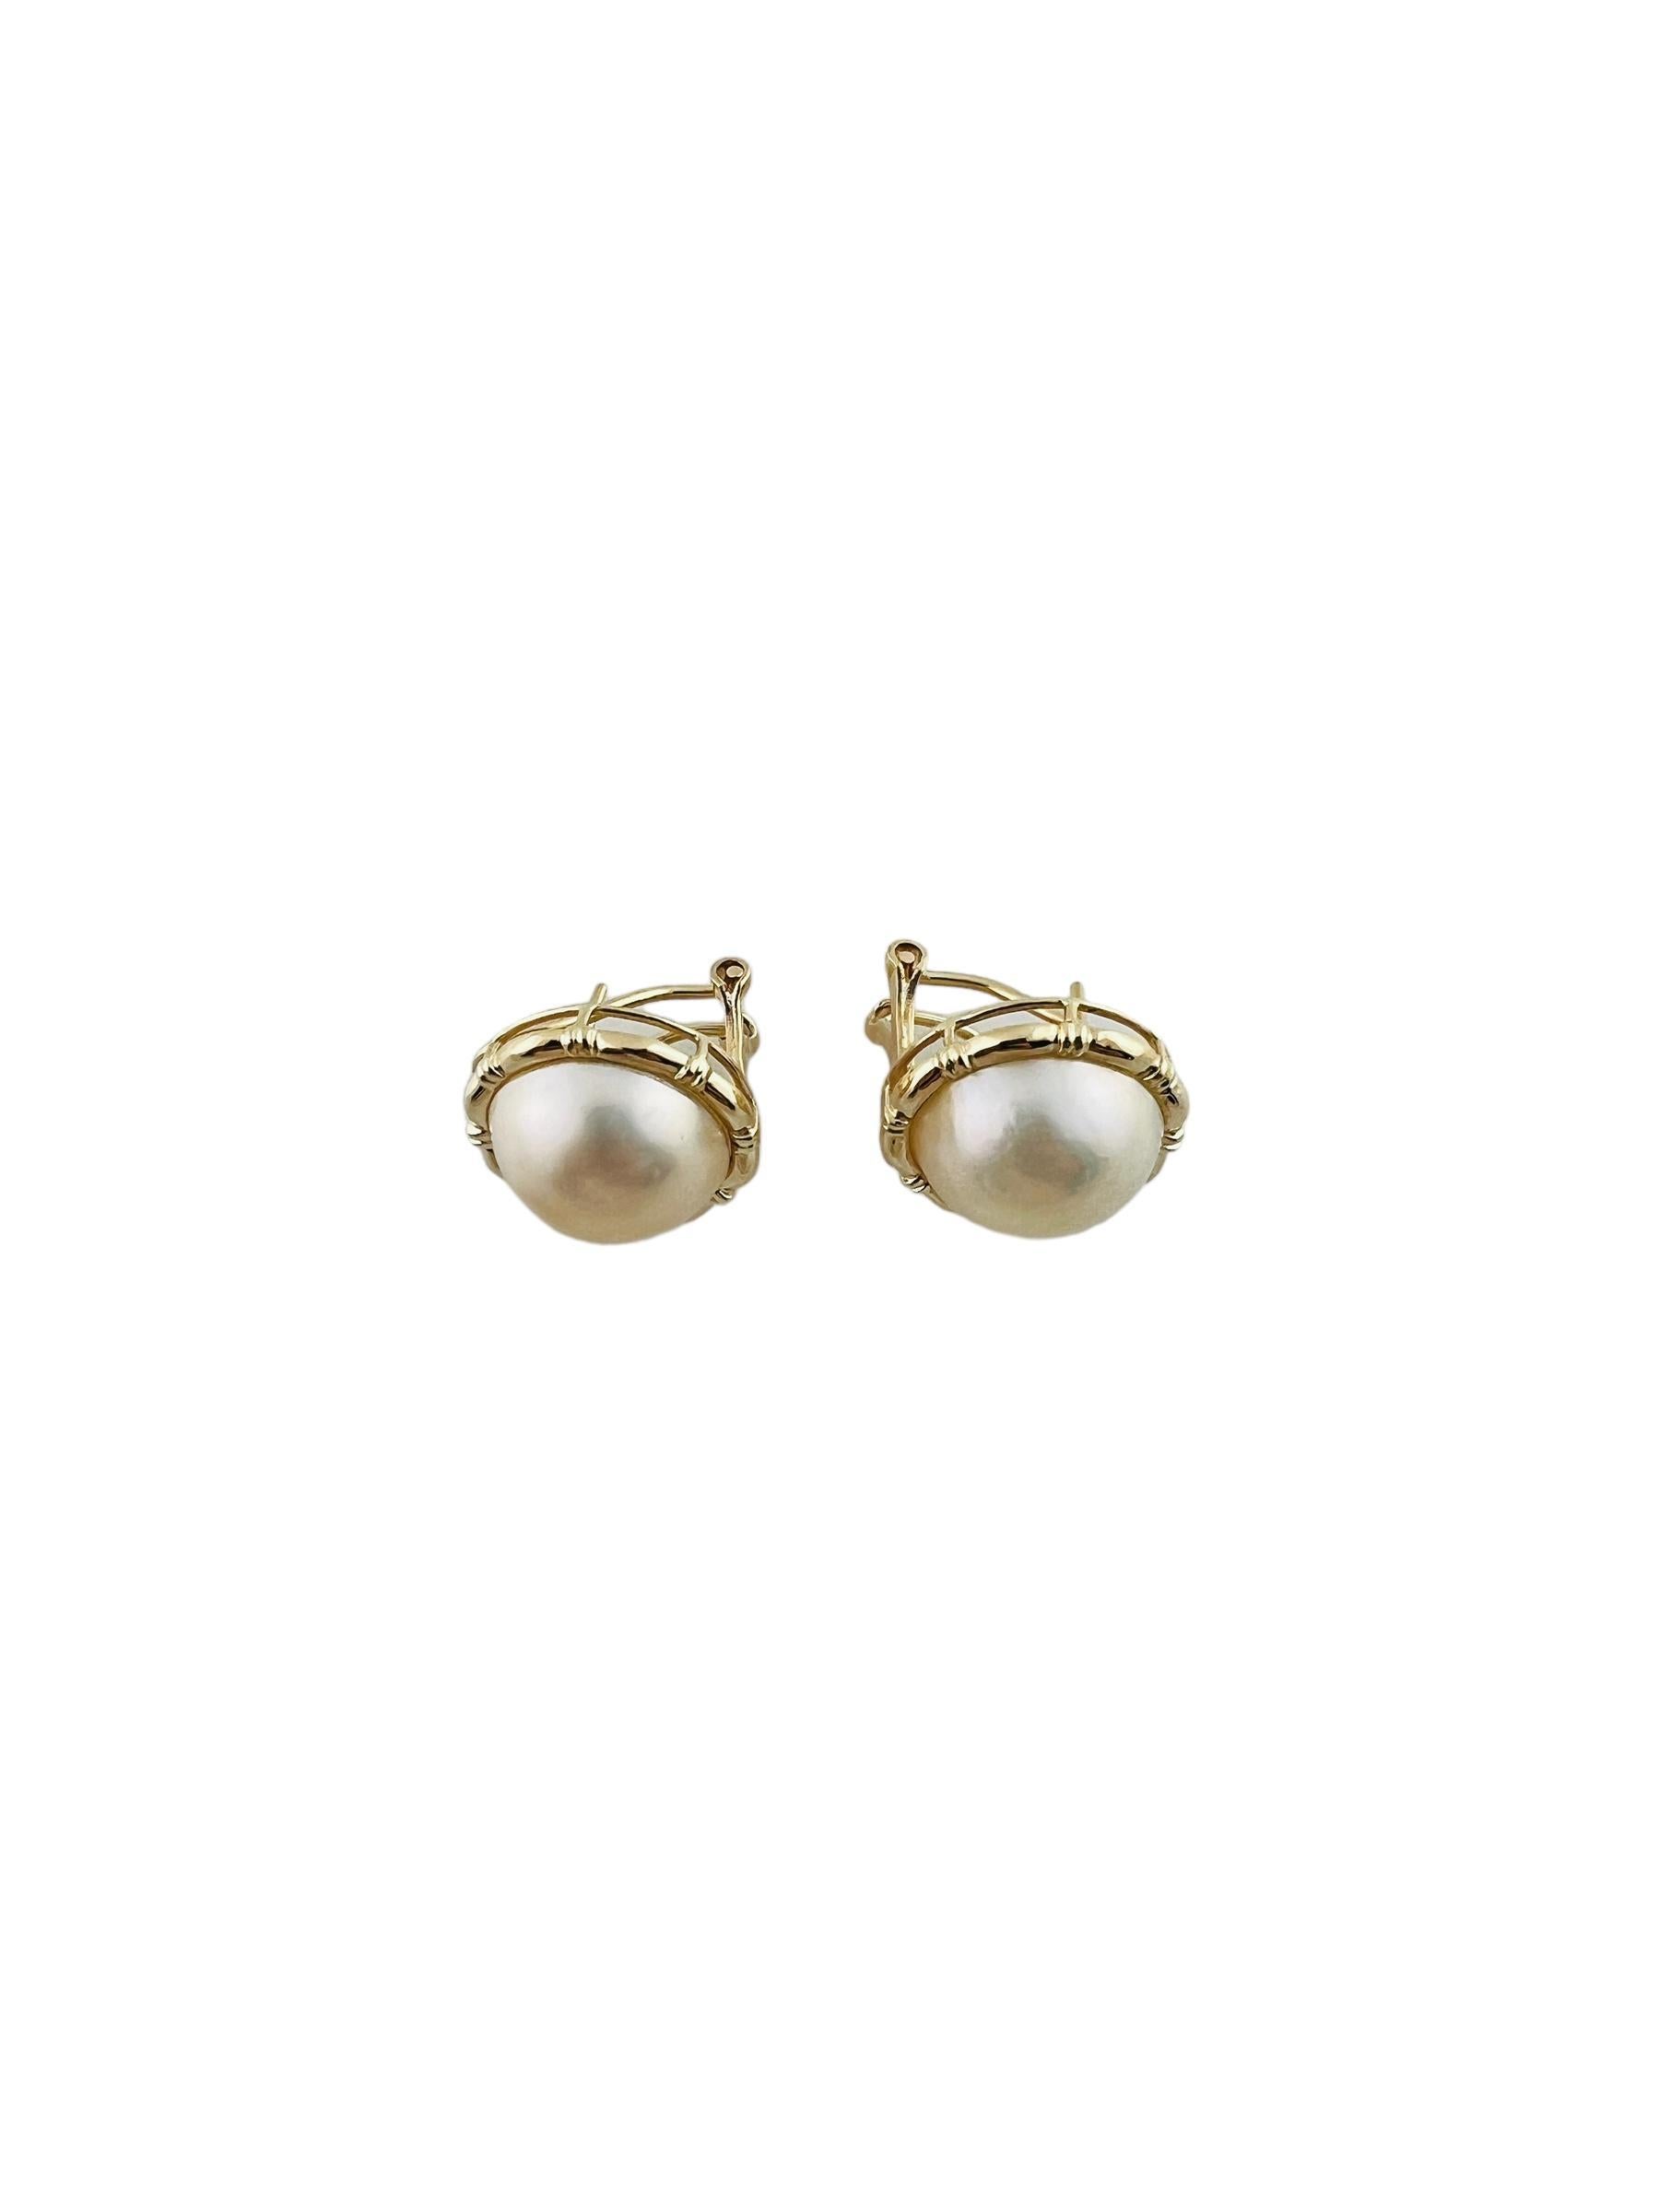 Women's 14K Yellow Gold Mabe Pearl Earrings #15940 For Sale